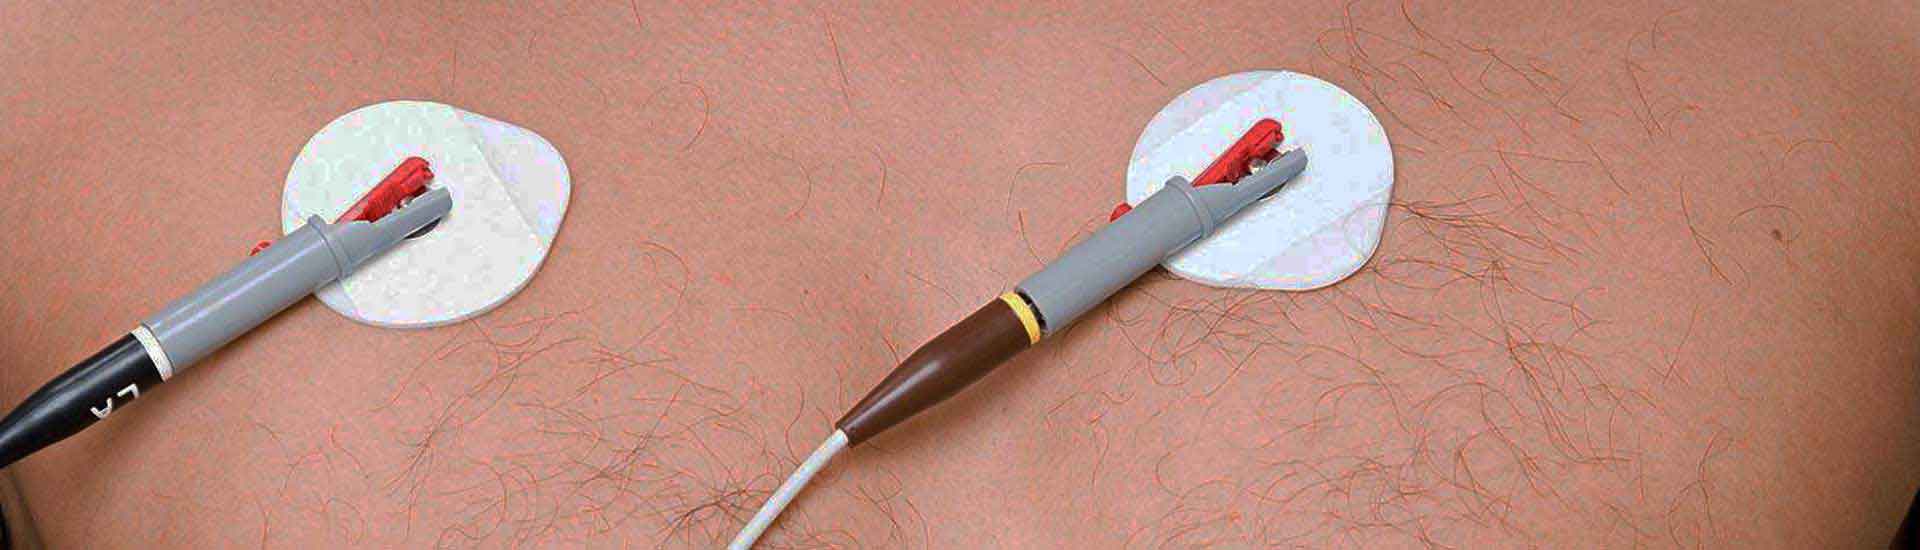 Photo: Electrodes which prevent skin abrasion